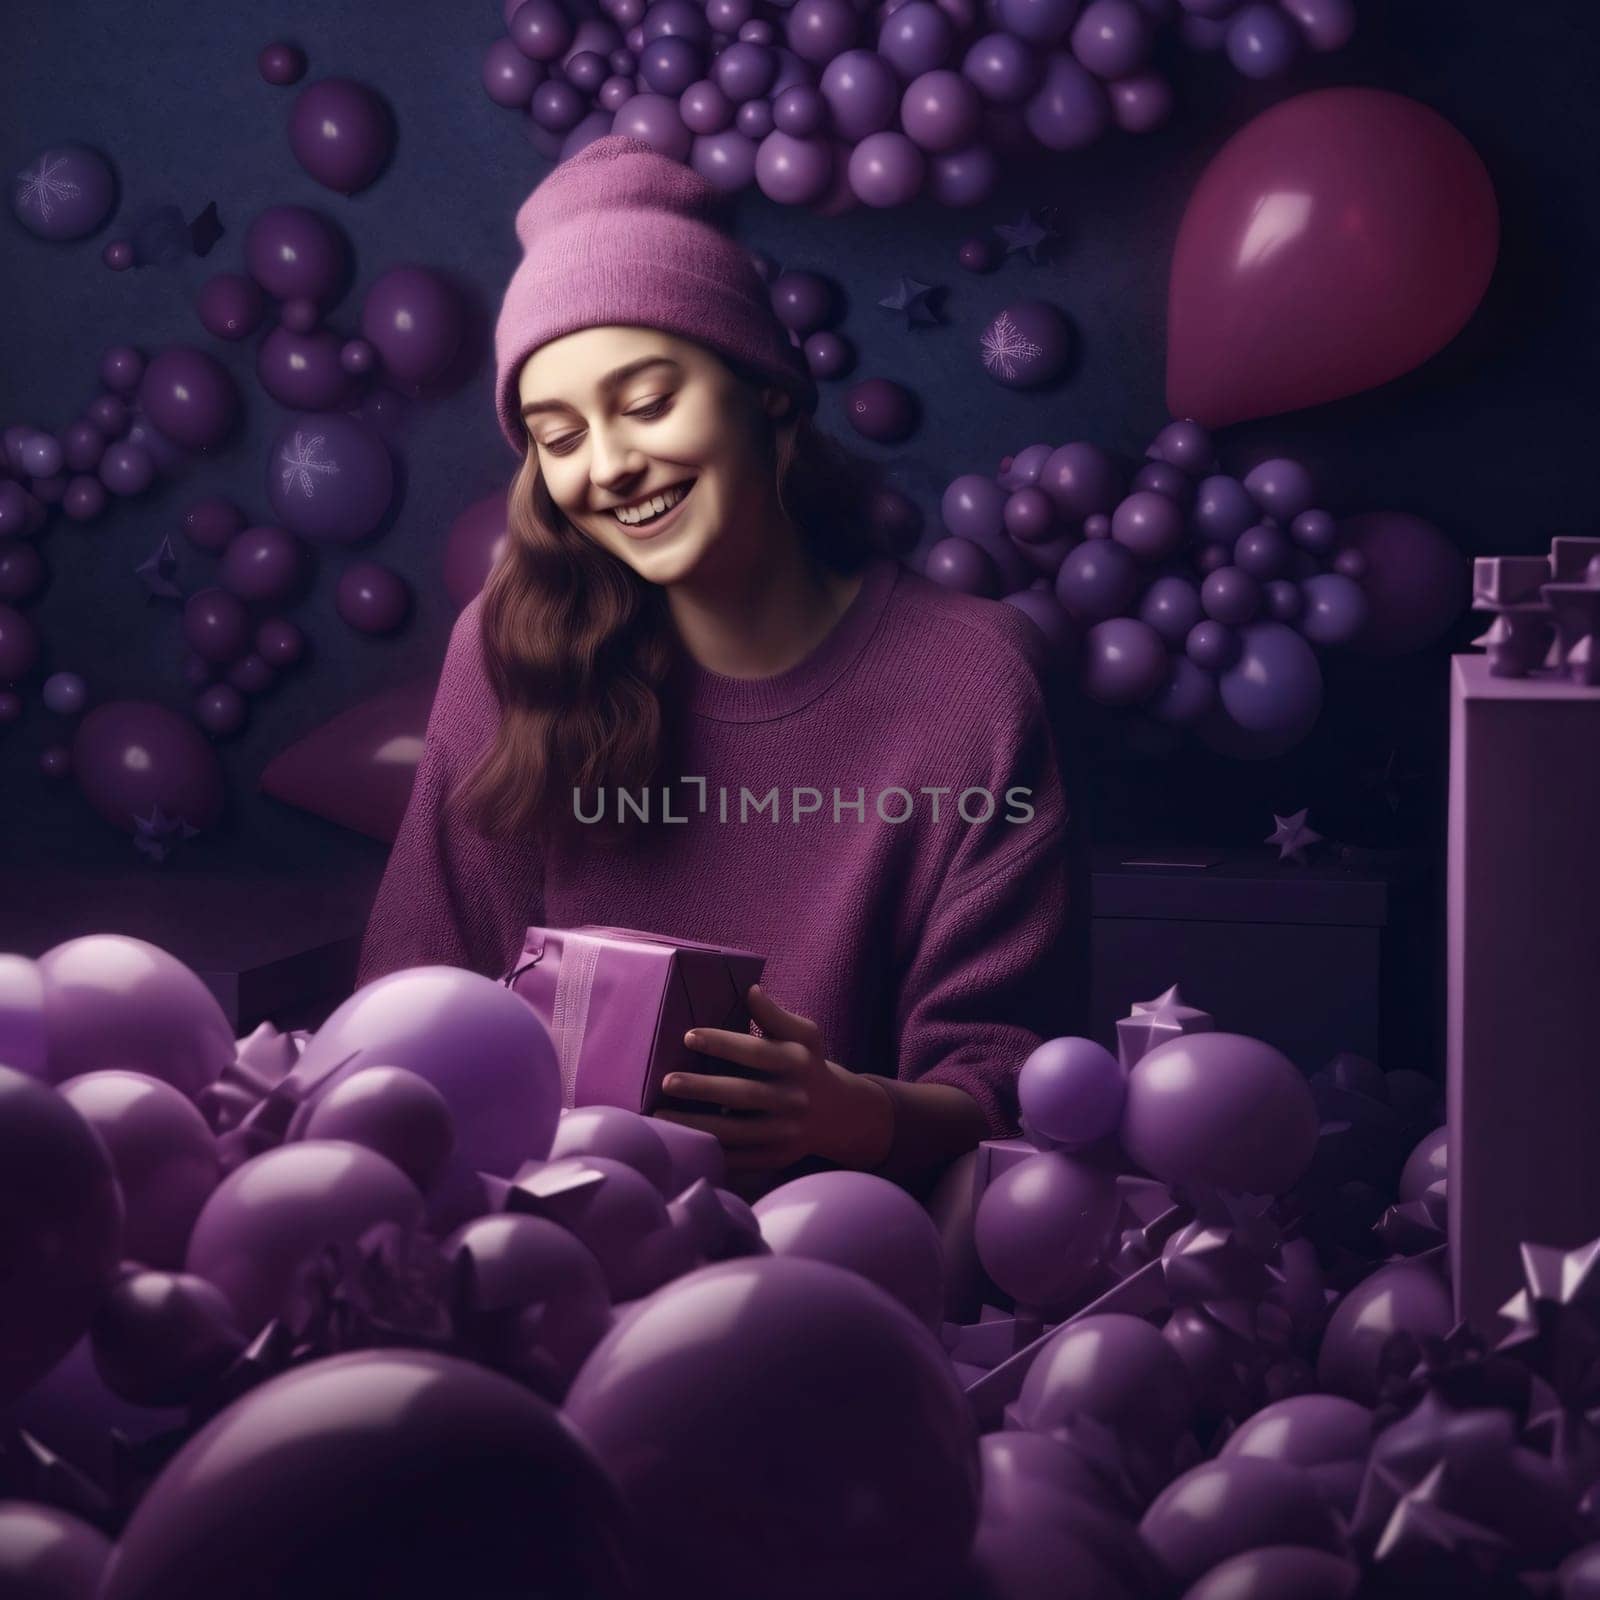 Purple balloons around a woman in a purple outfit. Gifts as a day symbol of present and love. A time of falling in love and love.